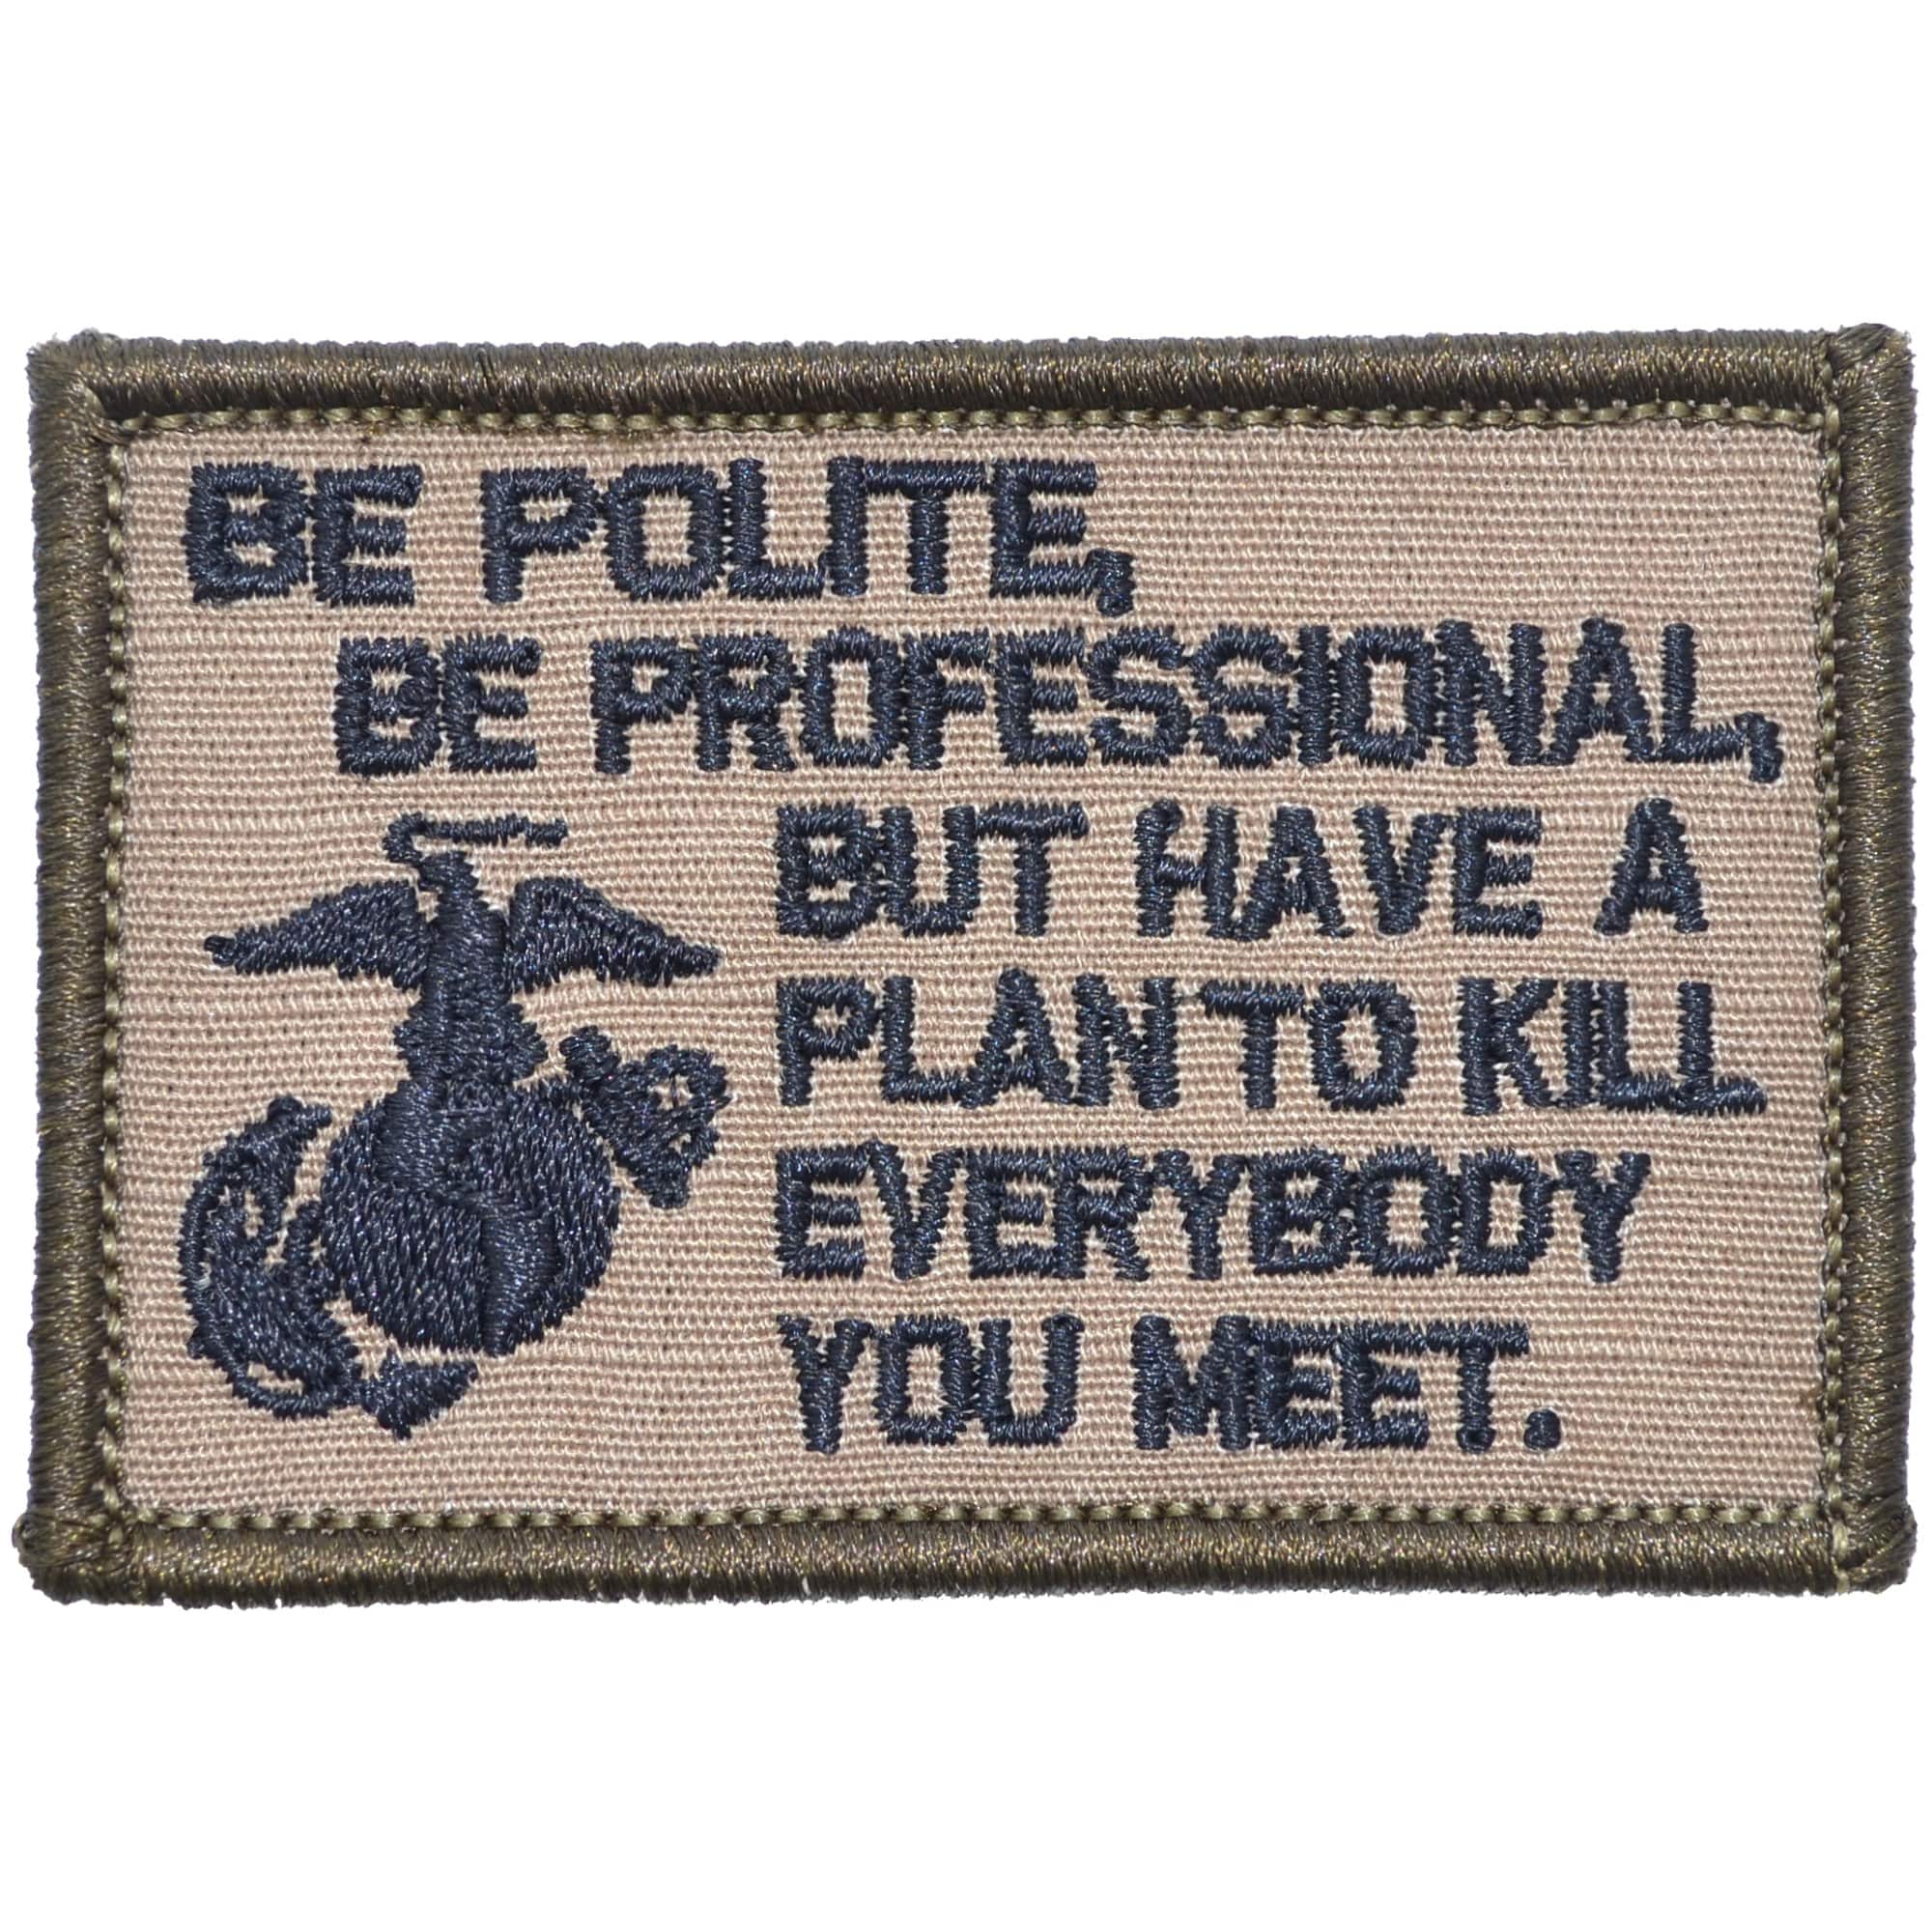 Tactical Gear Junkie Patches Coyote Brown w/ Black Be Polite, Be Professional USMC Mattis Quote - 2x3 Patch